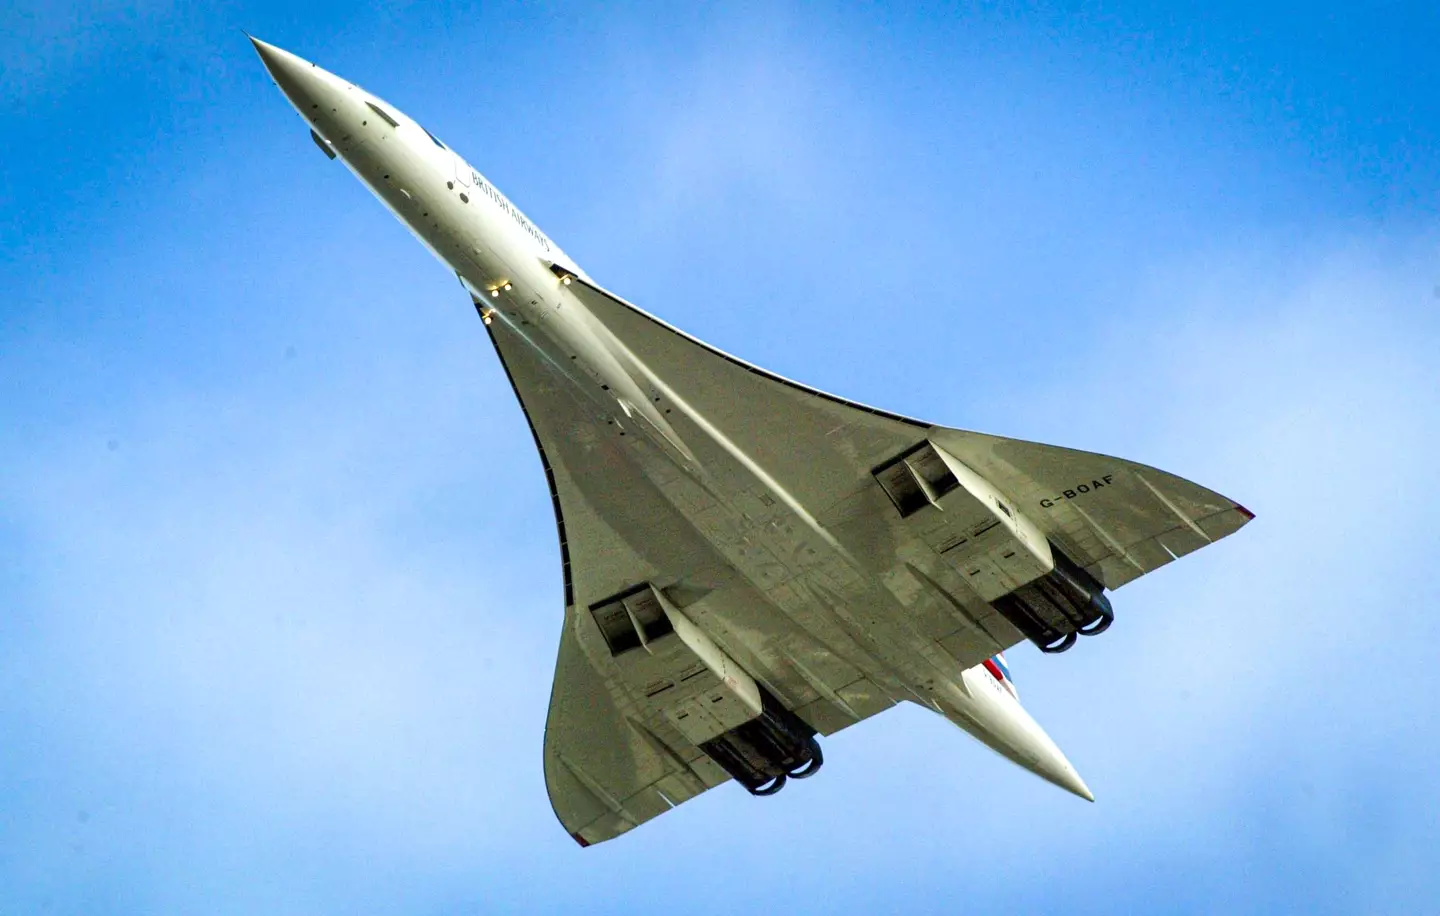 Concorde still holds the record for fastest civilian aircraft to complete a transatlantic crossing.